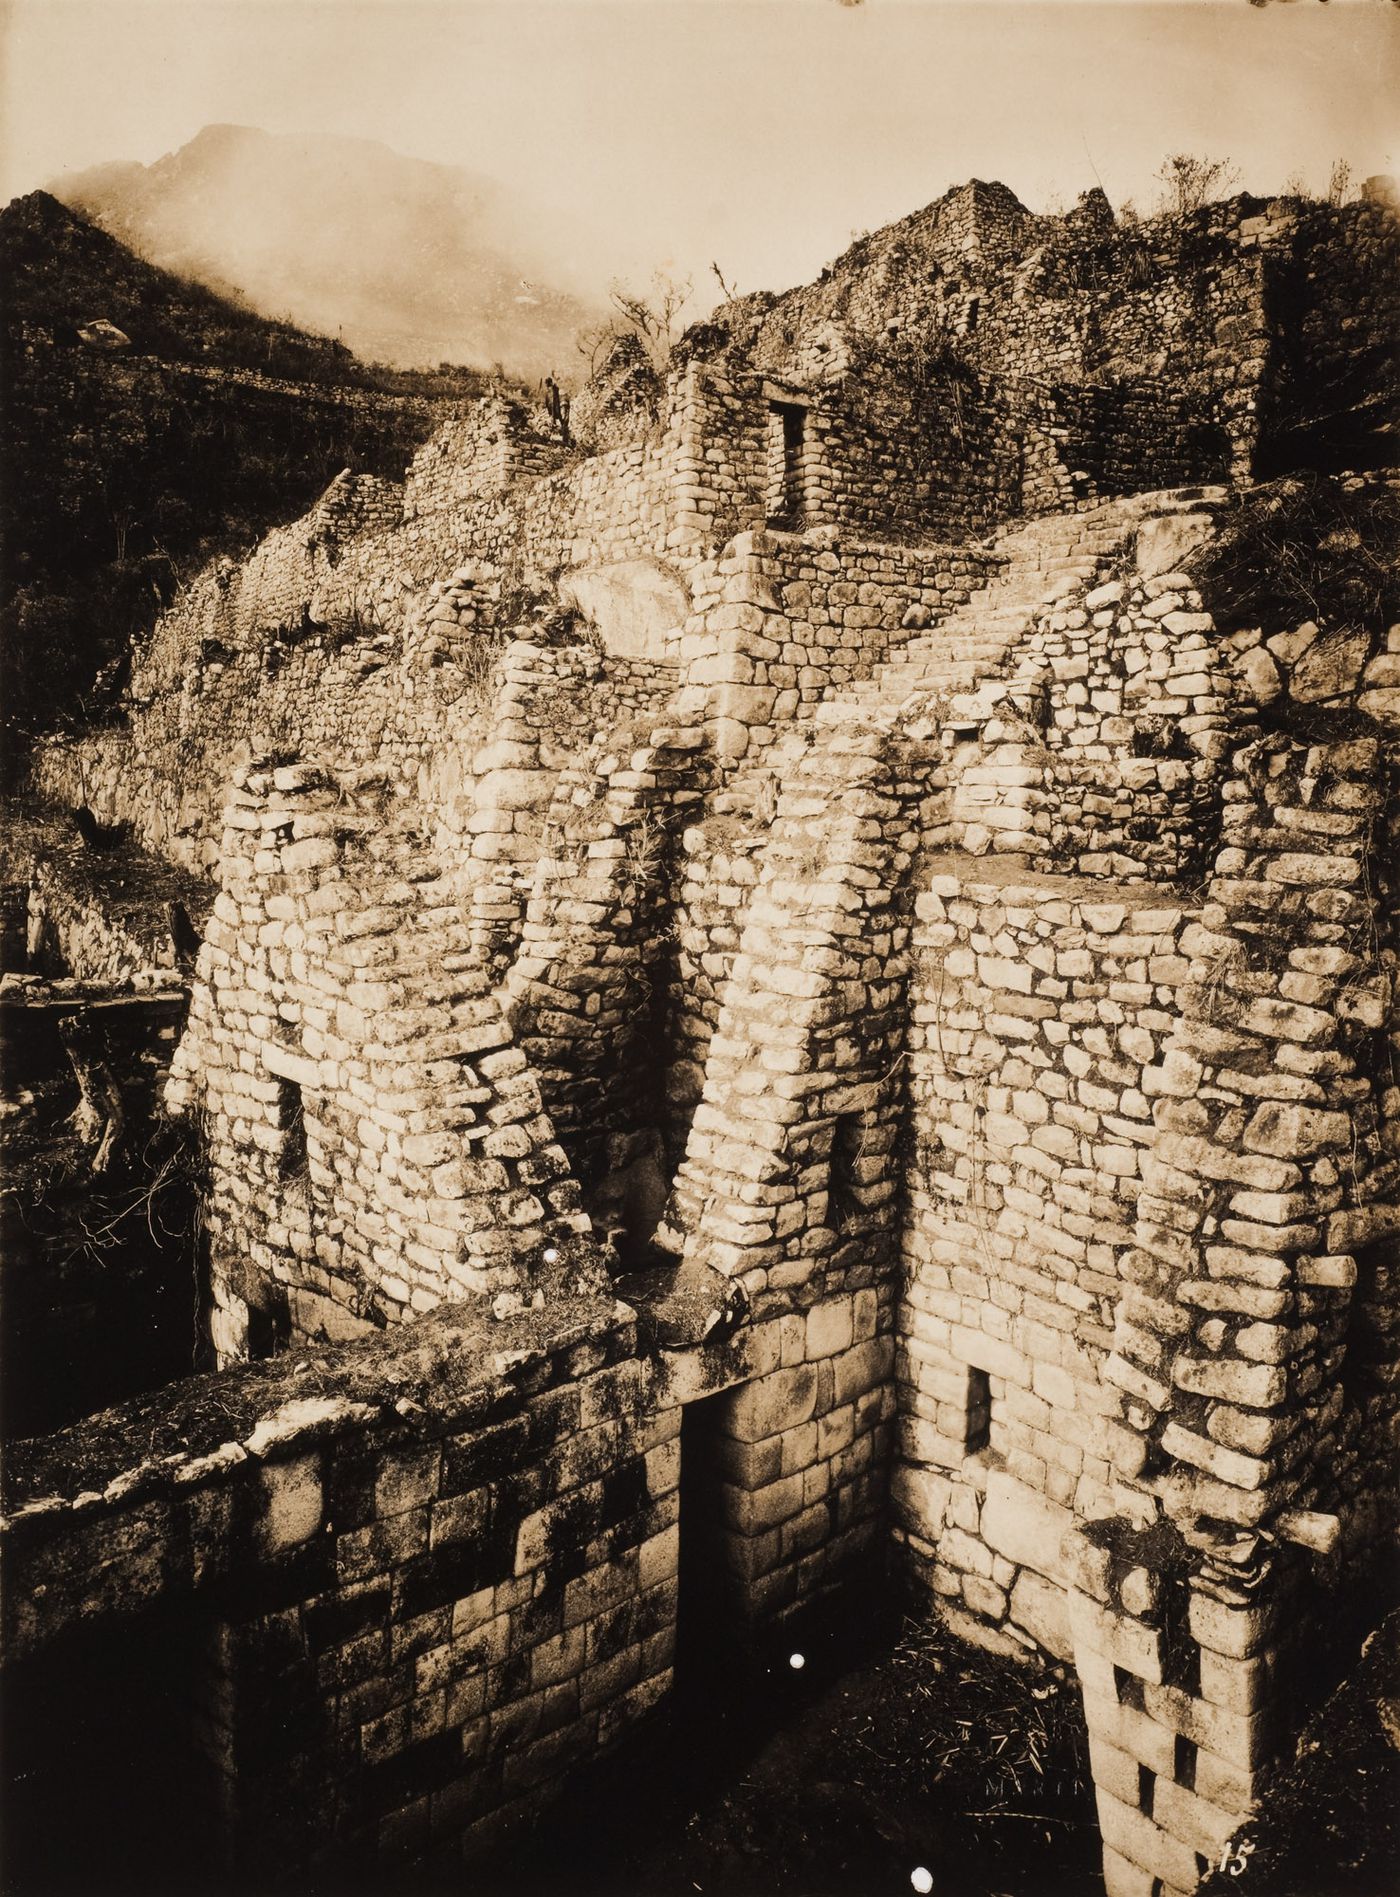 Partial view of the King's Group showing the courtyard and unidentified buildings, Machu Picchu, Peru